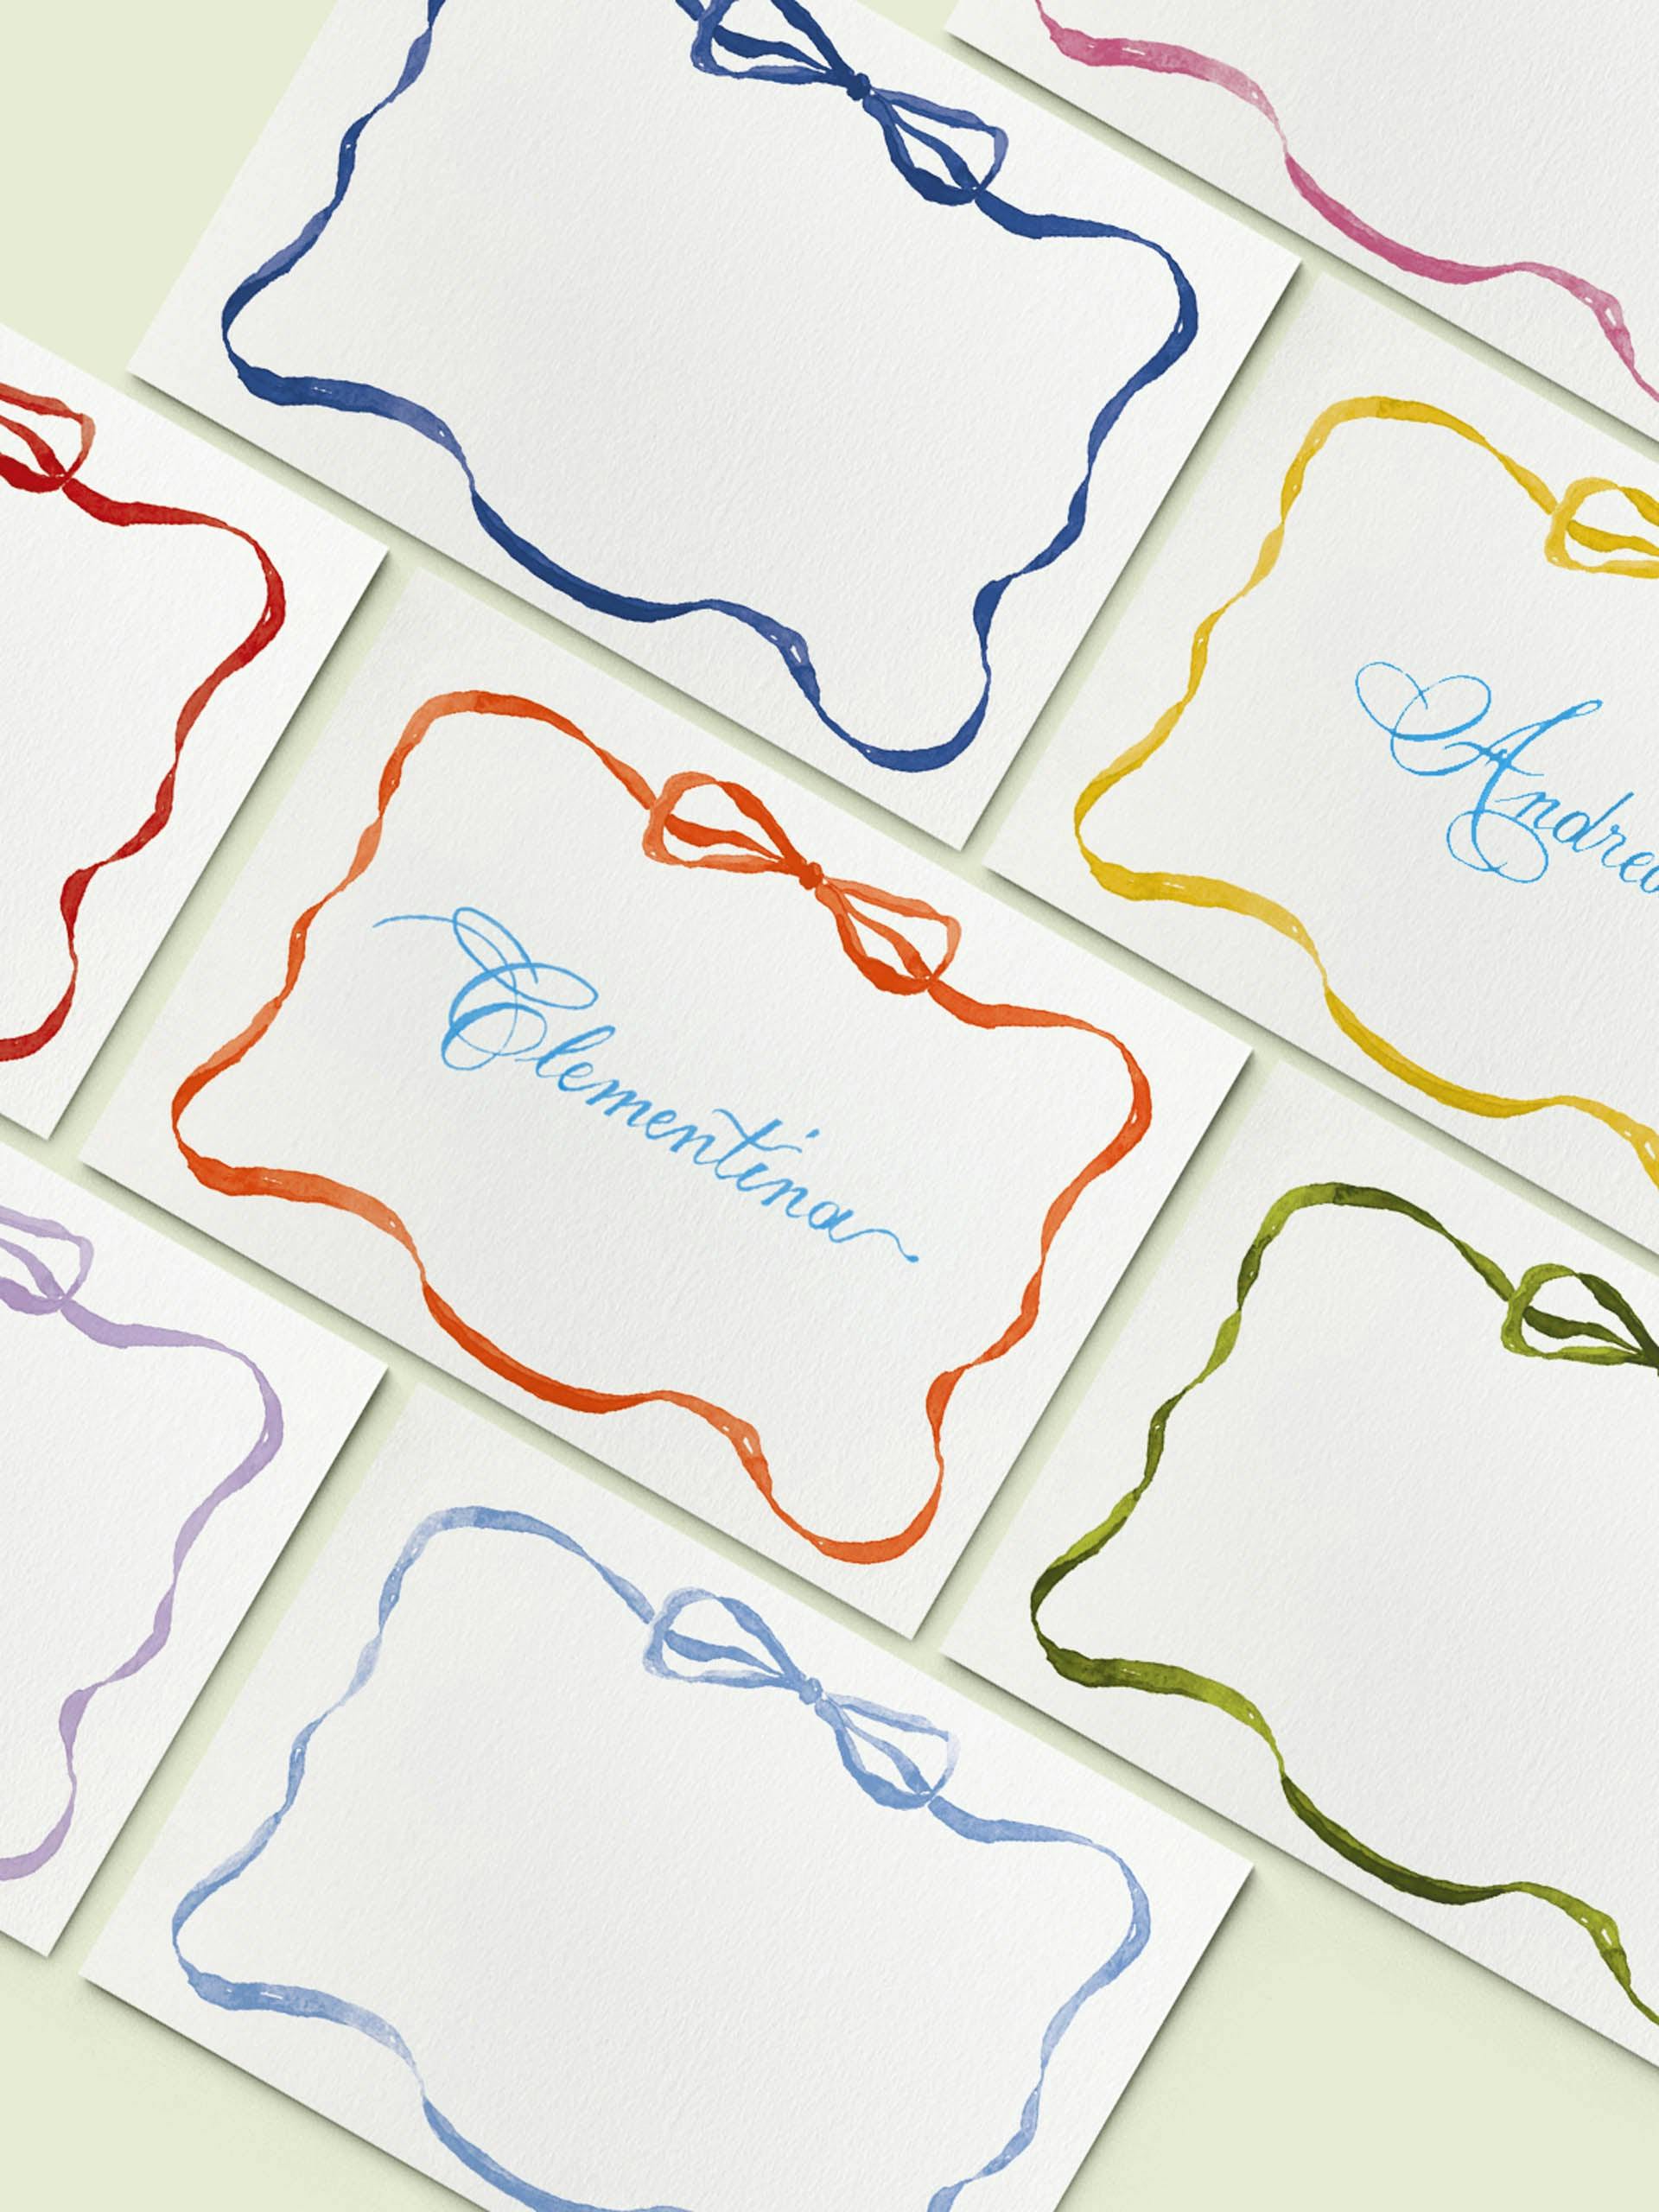 Ribbon place cards